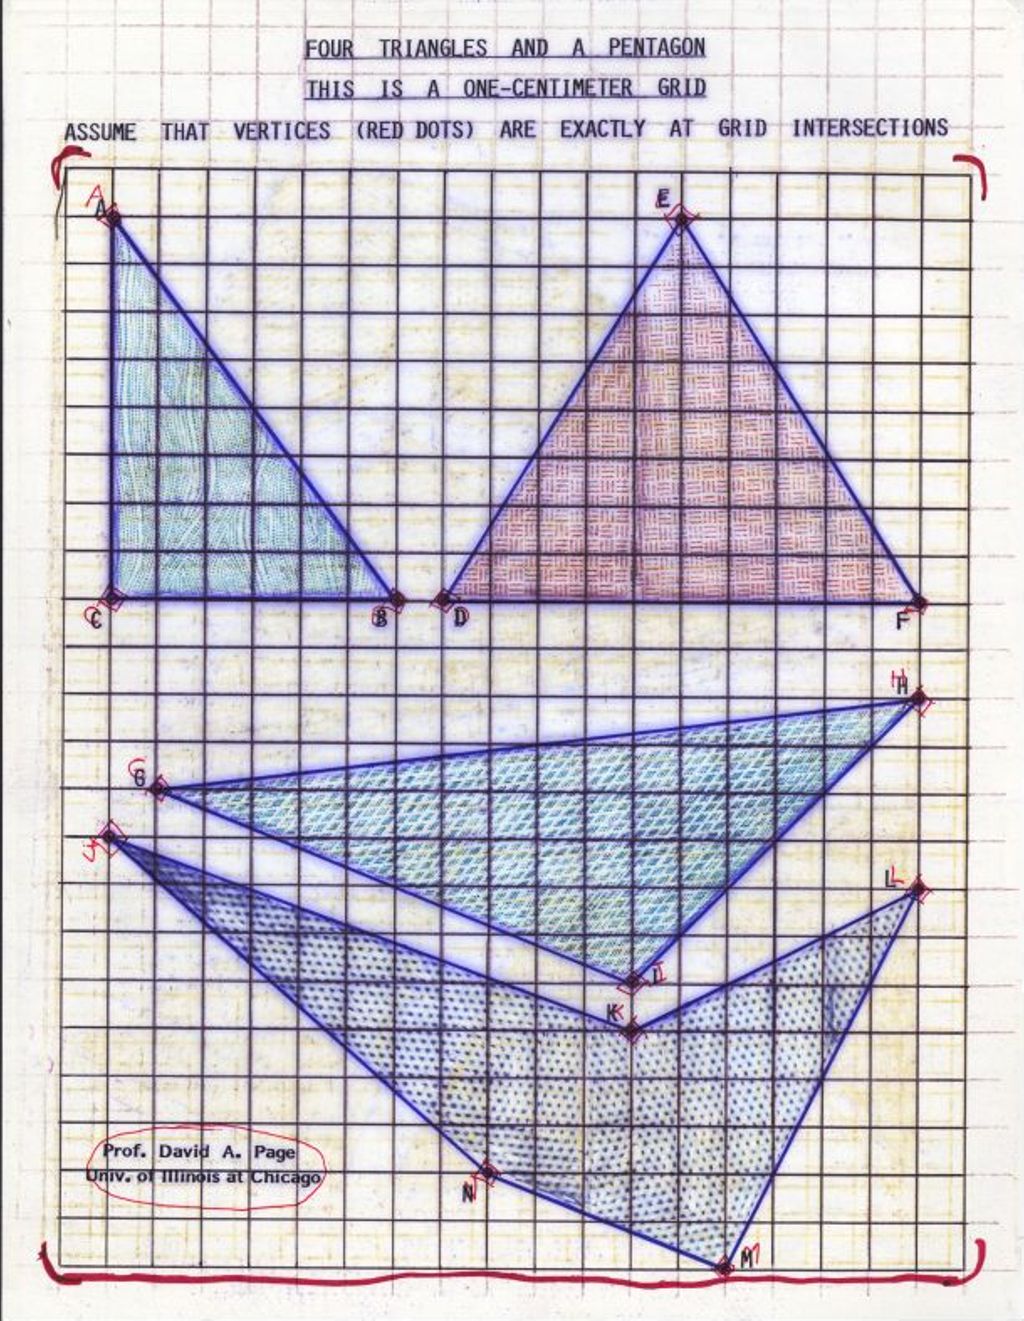 Miniature of Four Triangles and a Pentagon (grid)